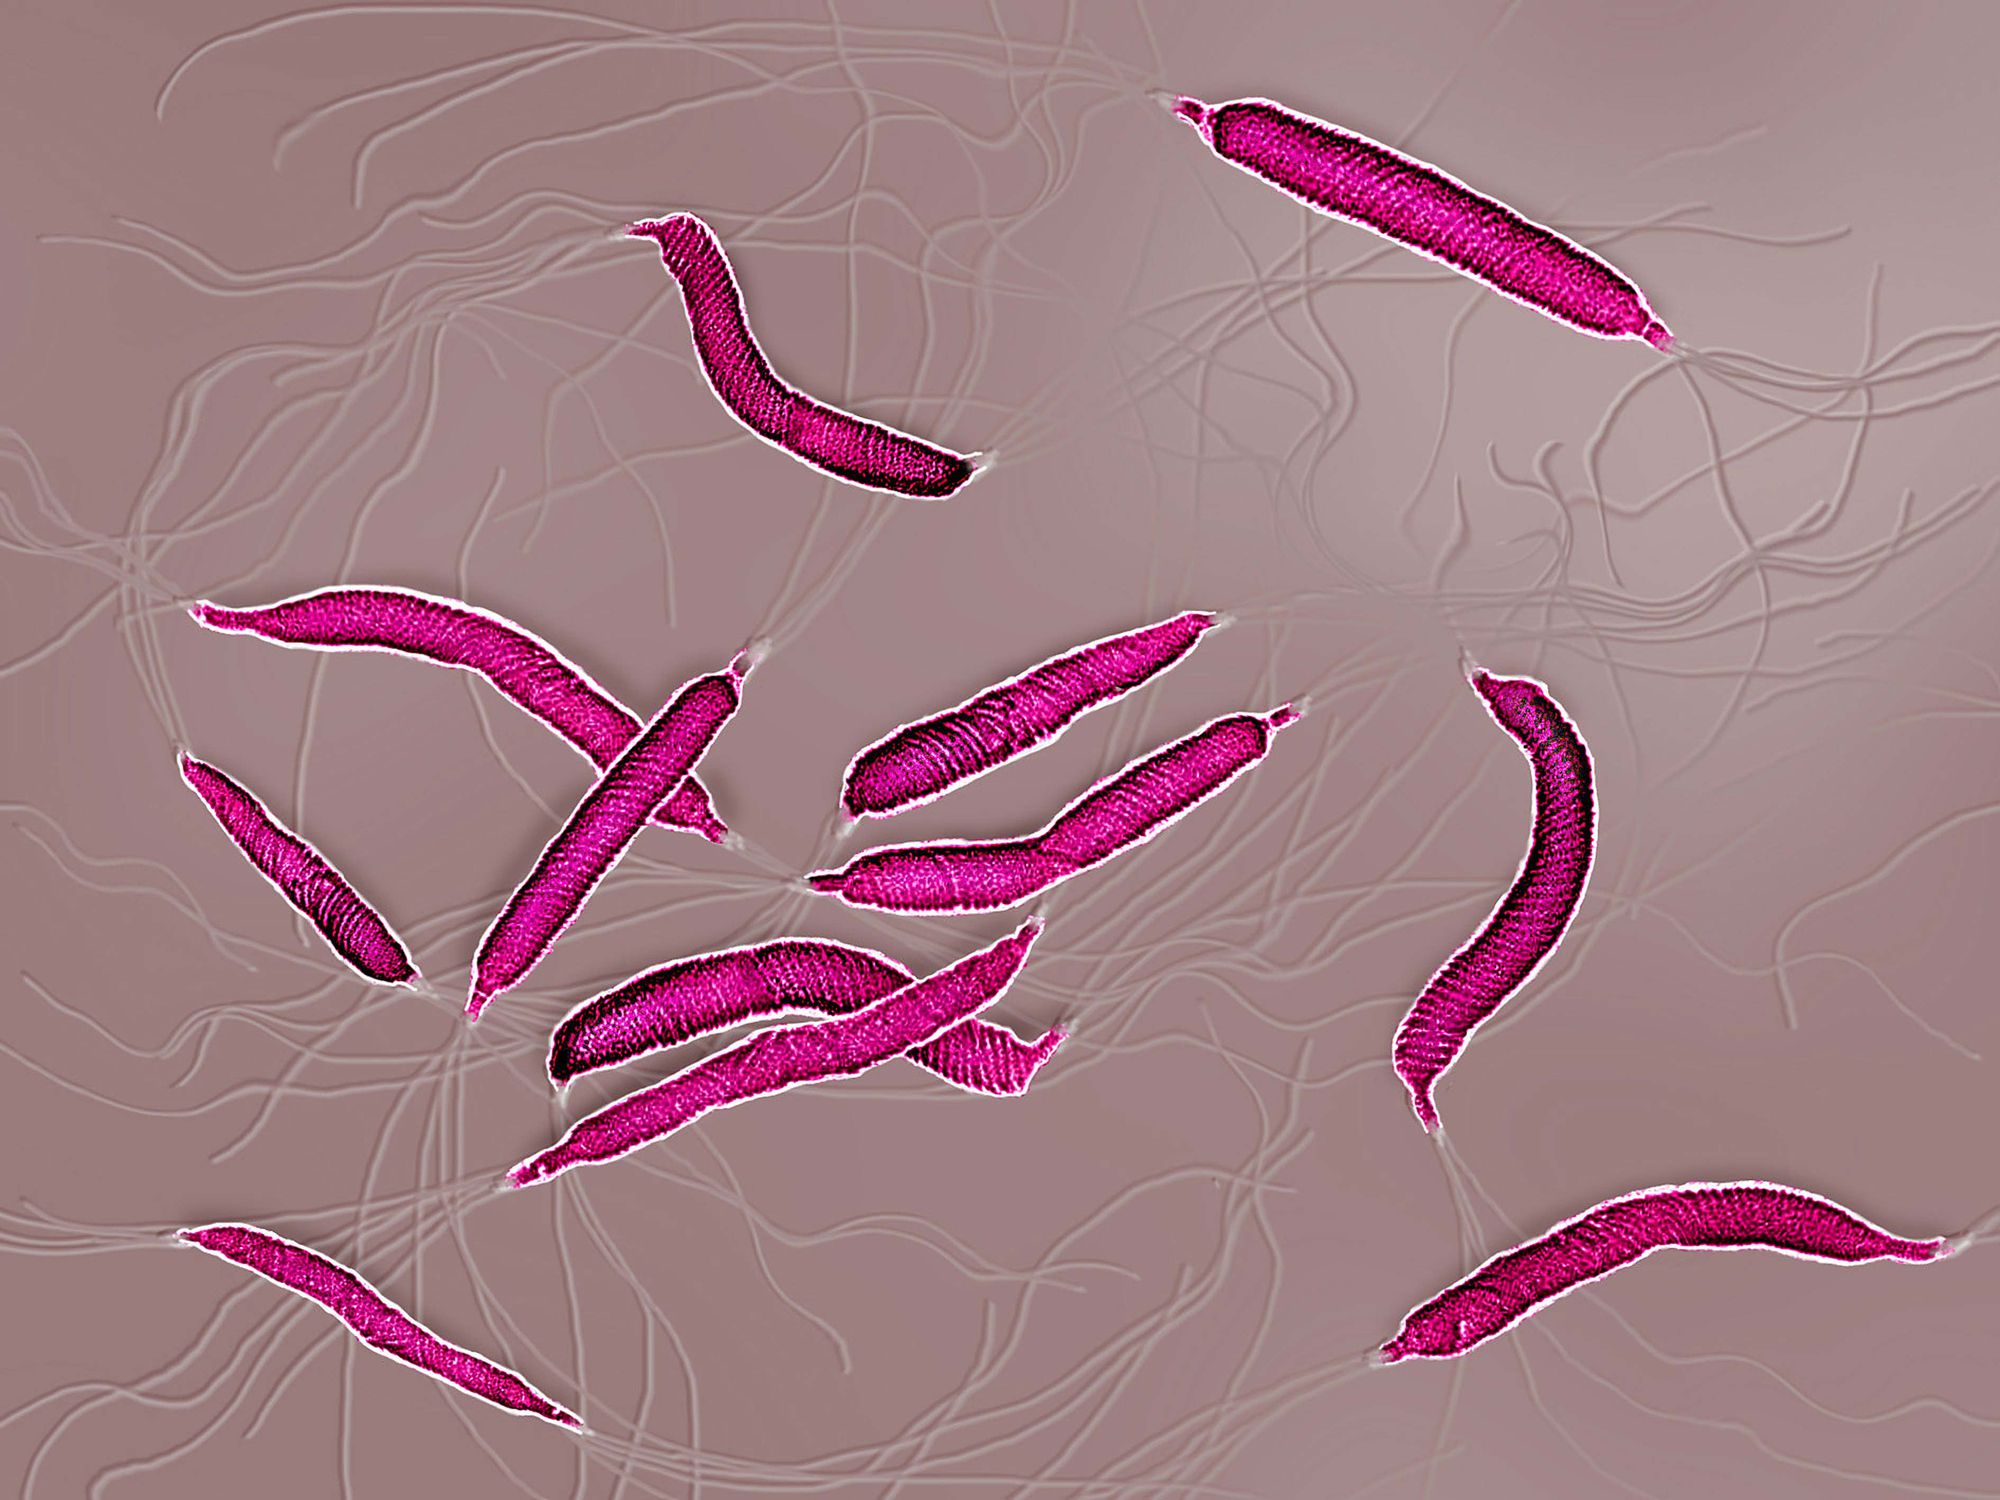 Helicobacter Pylori Infection and Migraines